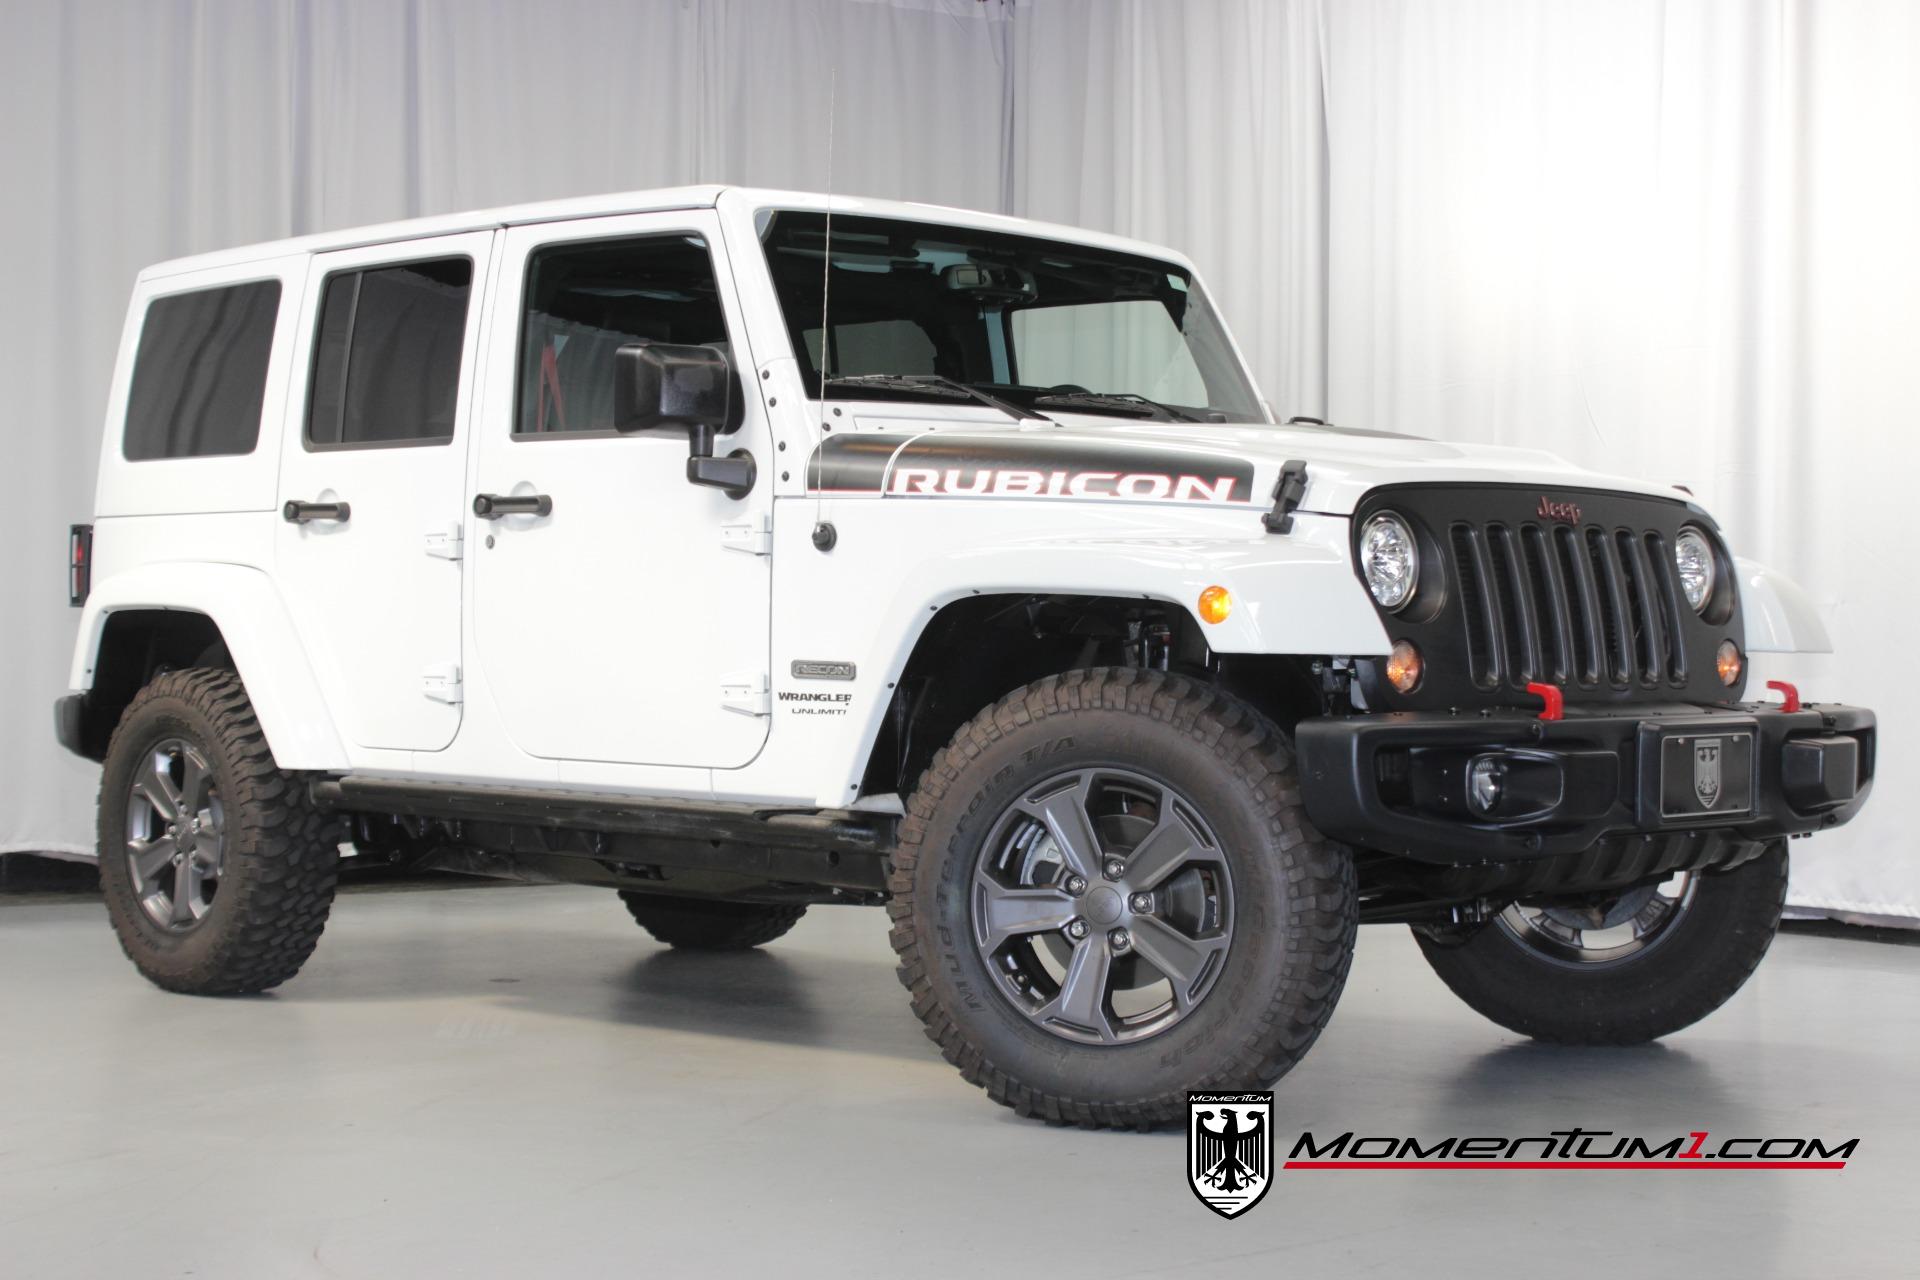 Used 2018 Jeep Wrangler JK Unlimited Rubicon Recon For Sale (Sold) |  Momentum Motorcars Inc Stock #845221